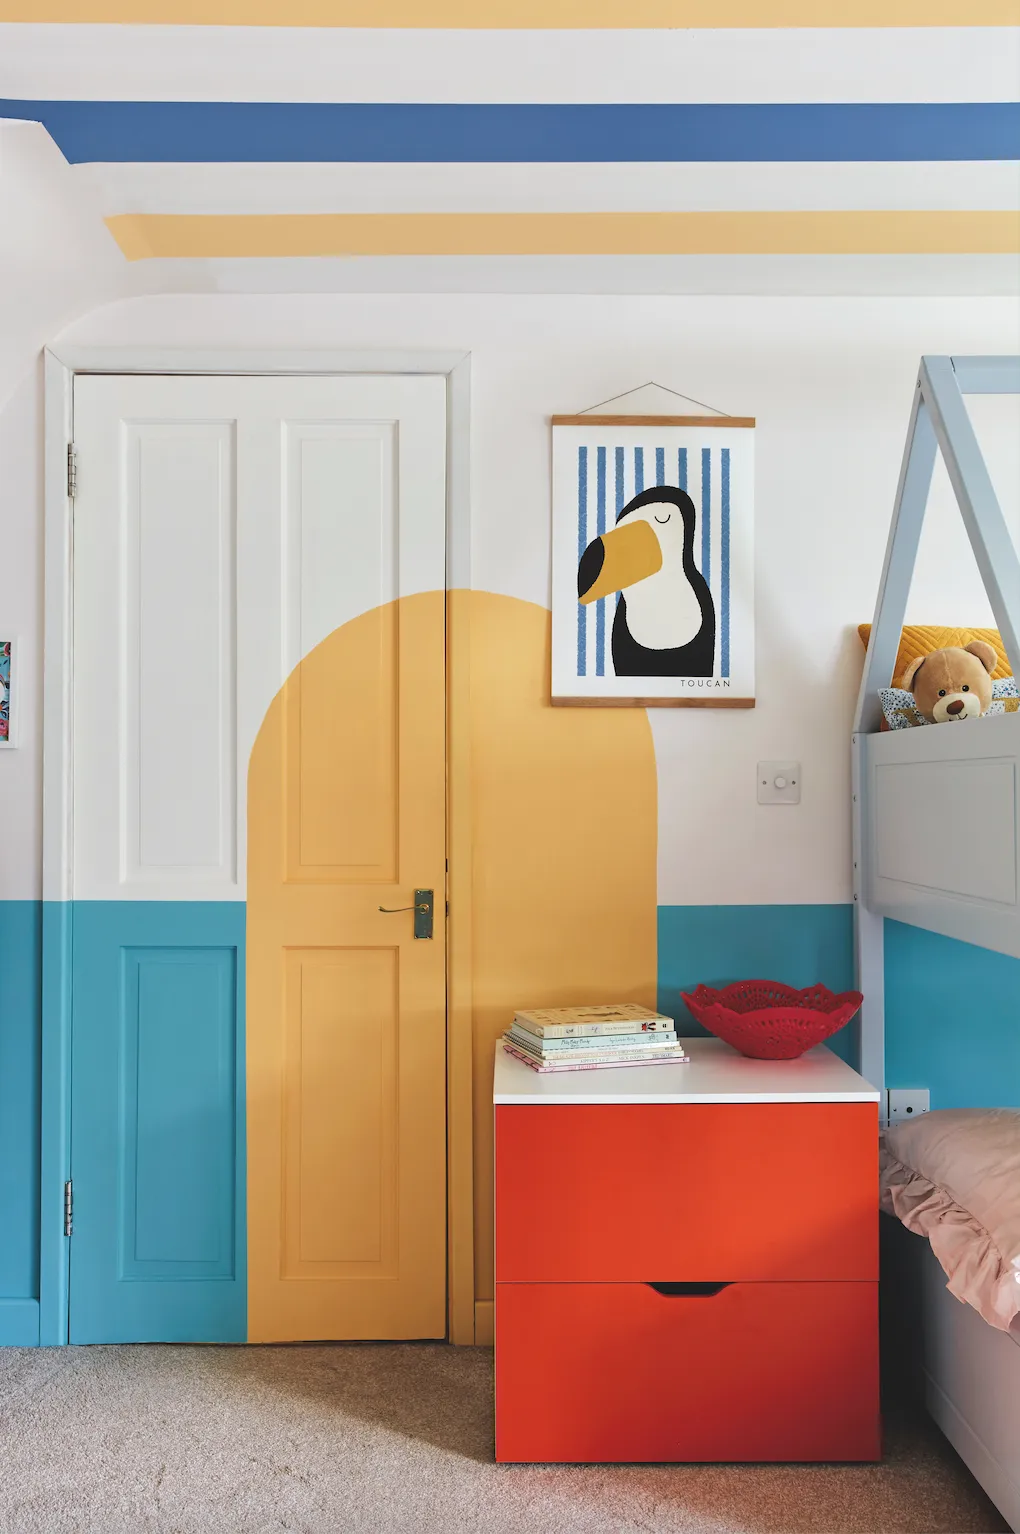 William’s room, which he now shares with sister Cecelia, is packed with bright accents. ‘There’s no doubt that William is my child,’ says Charlotte. ‘When we were planning this room, his only criteria was to make it really colourful